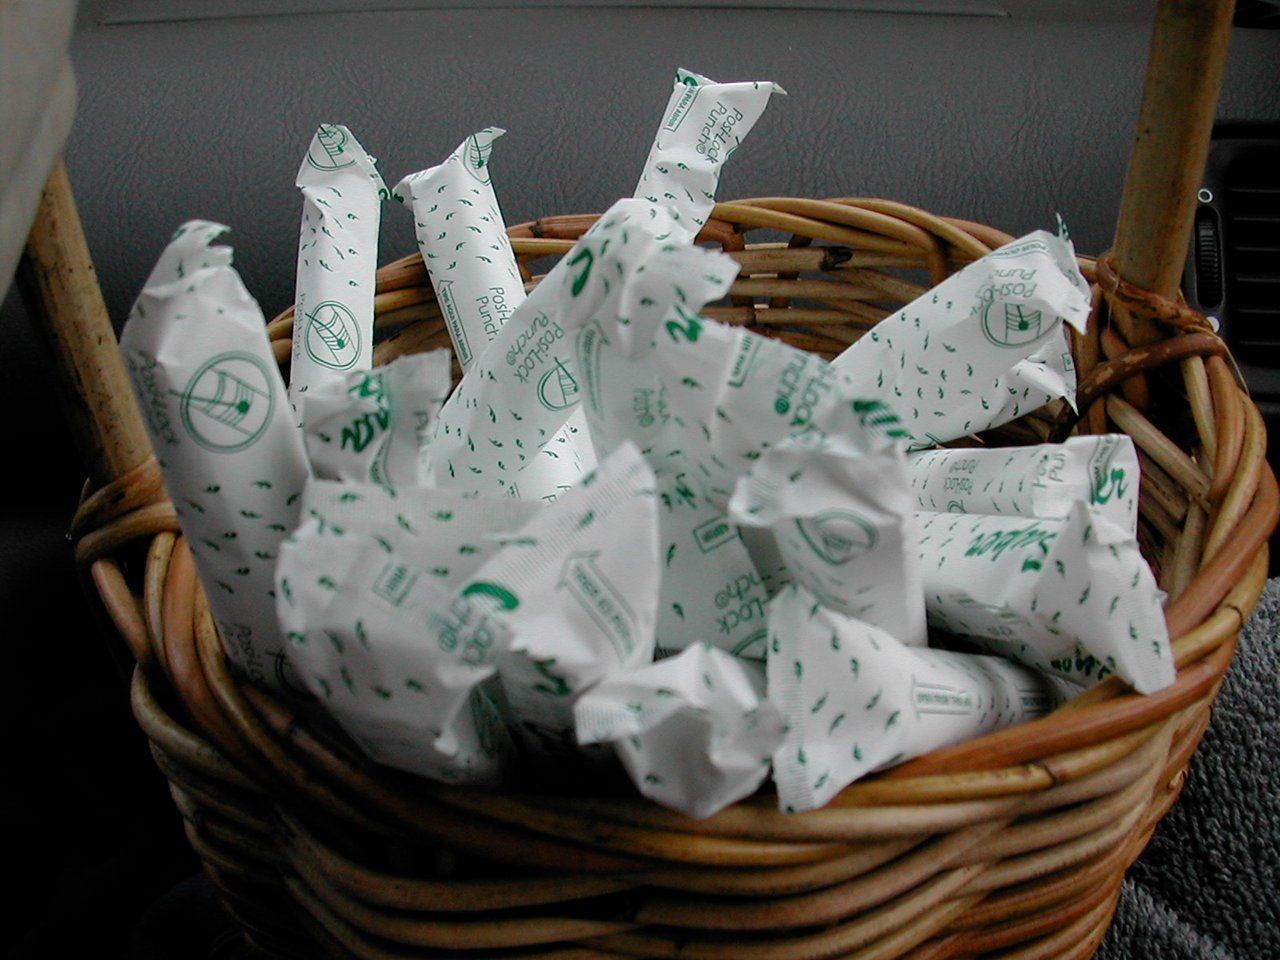 How much do Canadian women ACTUALLY spend on tampons and pads each year?